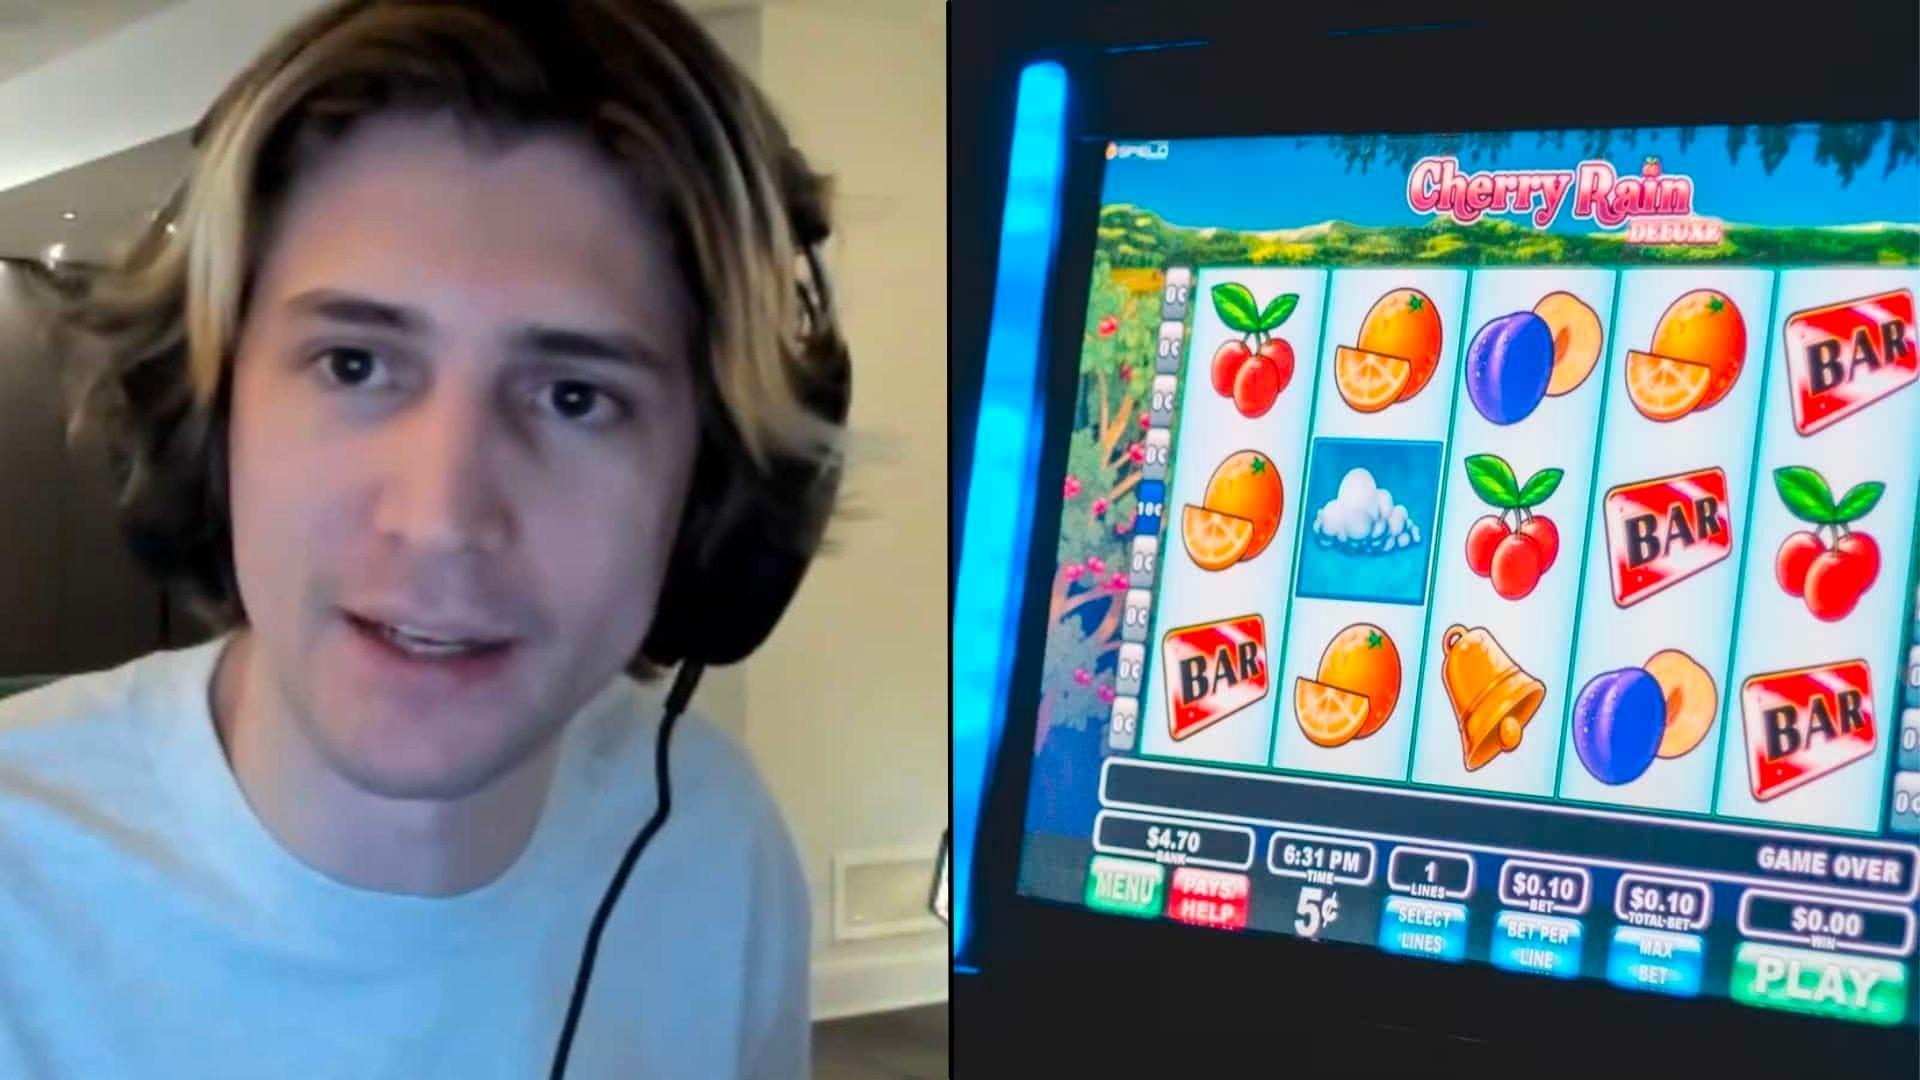 xQc talking to camera next to colorful slot machine